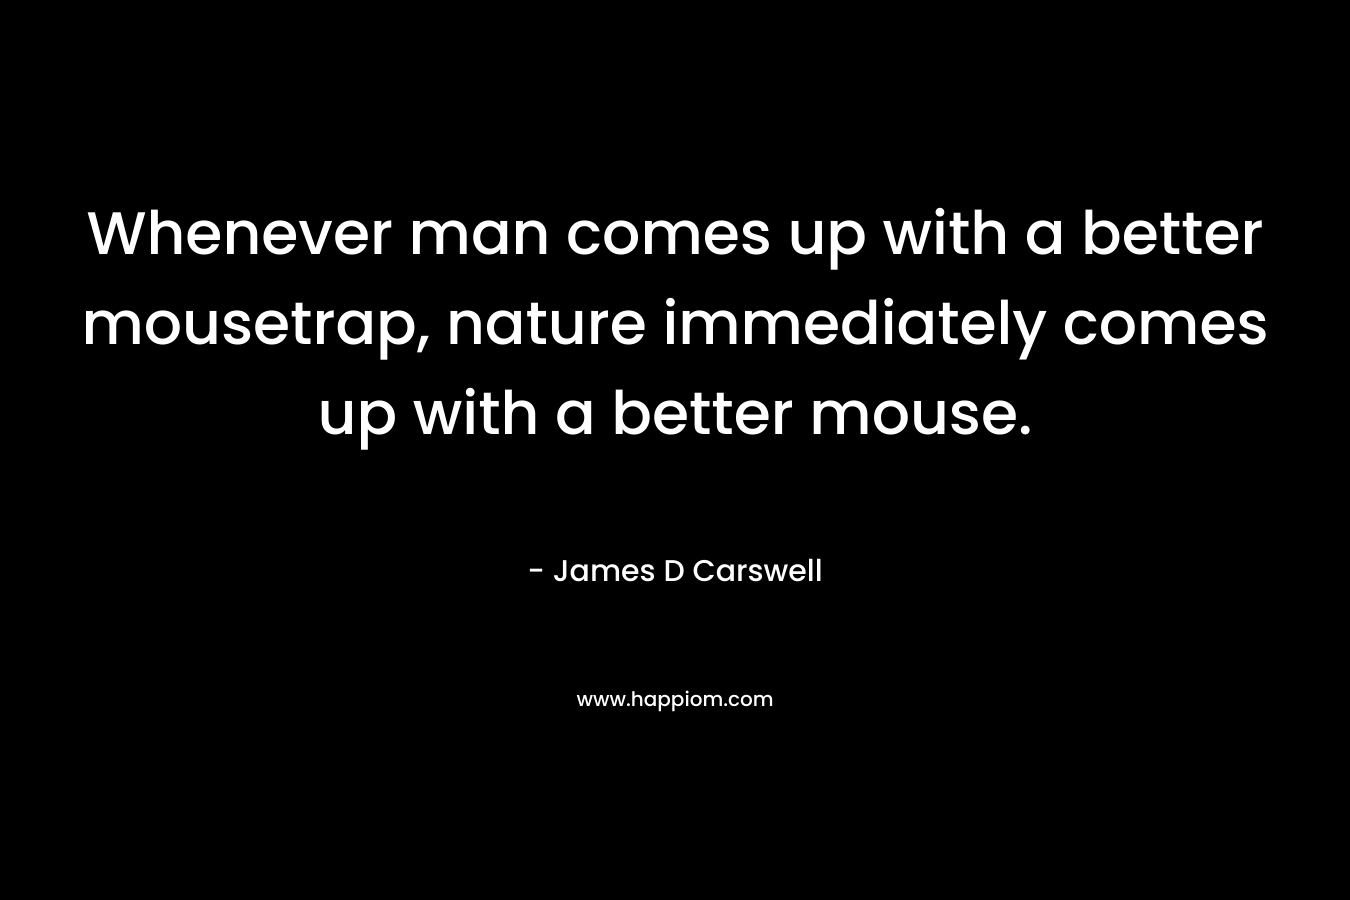 Whenever man comes up with a better mousetrap, nature immediately comes up with a better mouse.